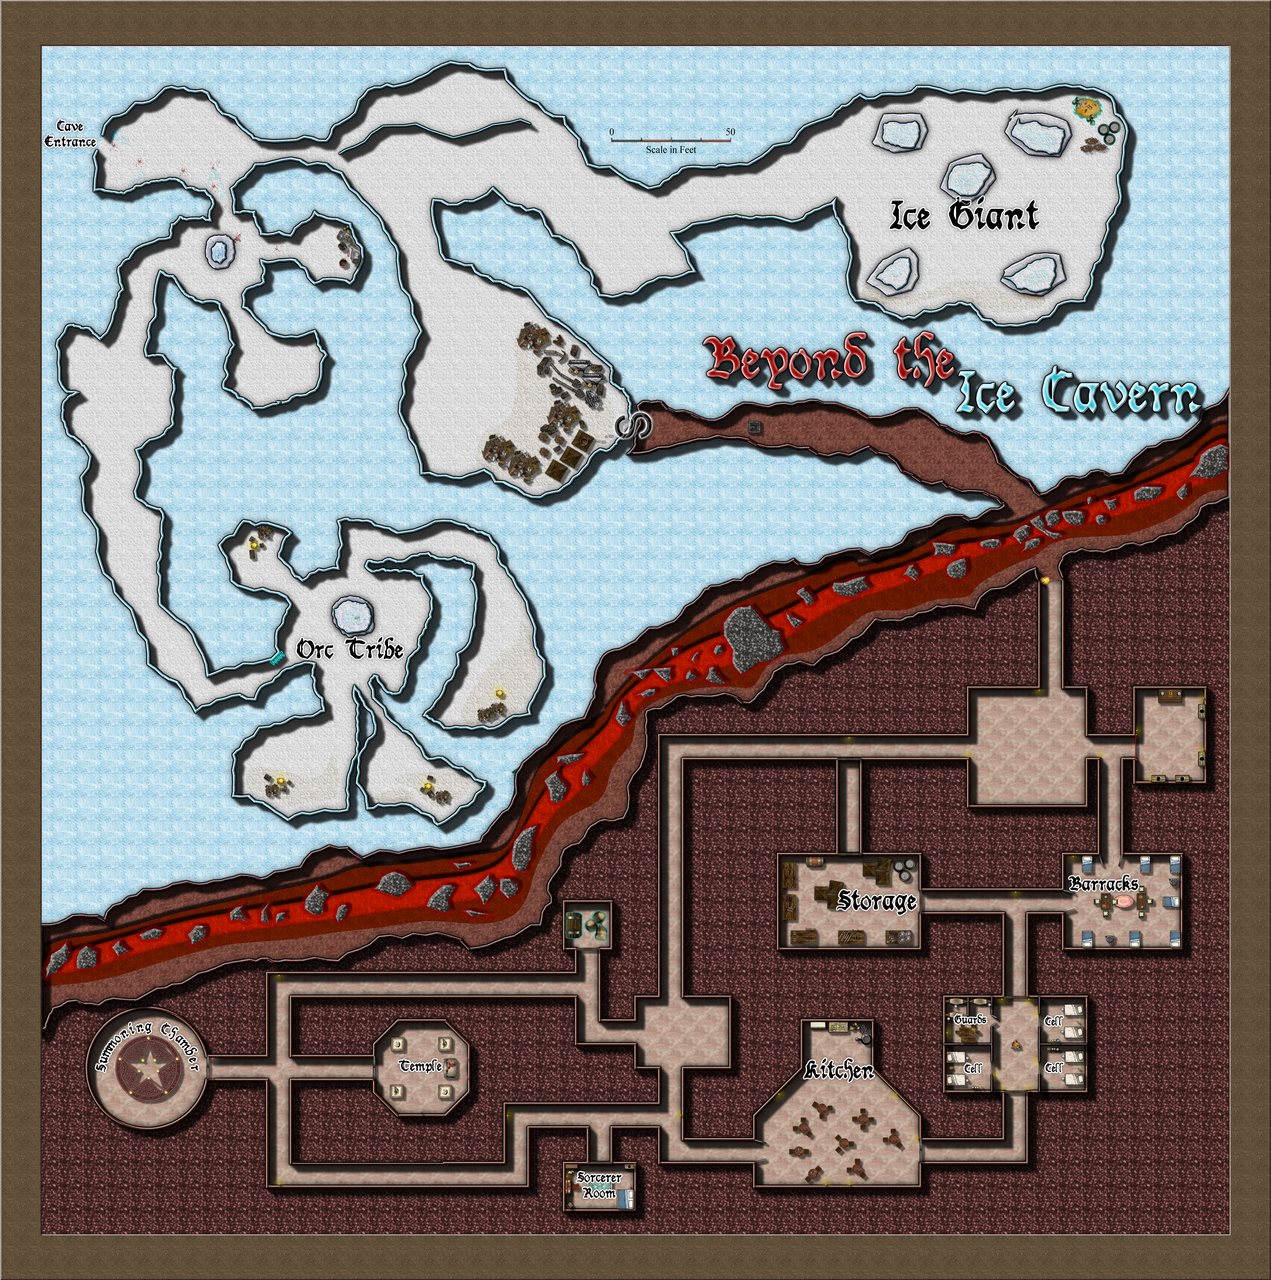 Nibirum Map: beyond the ice cavern by Calibre